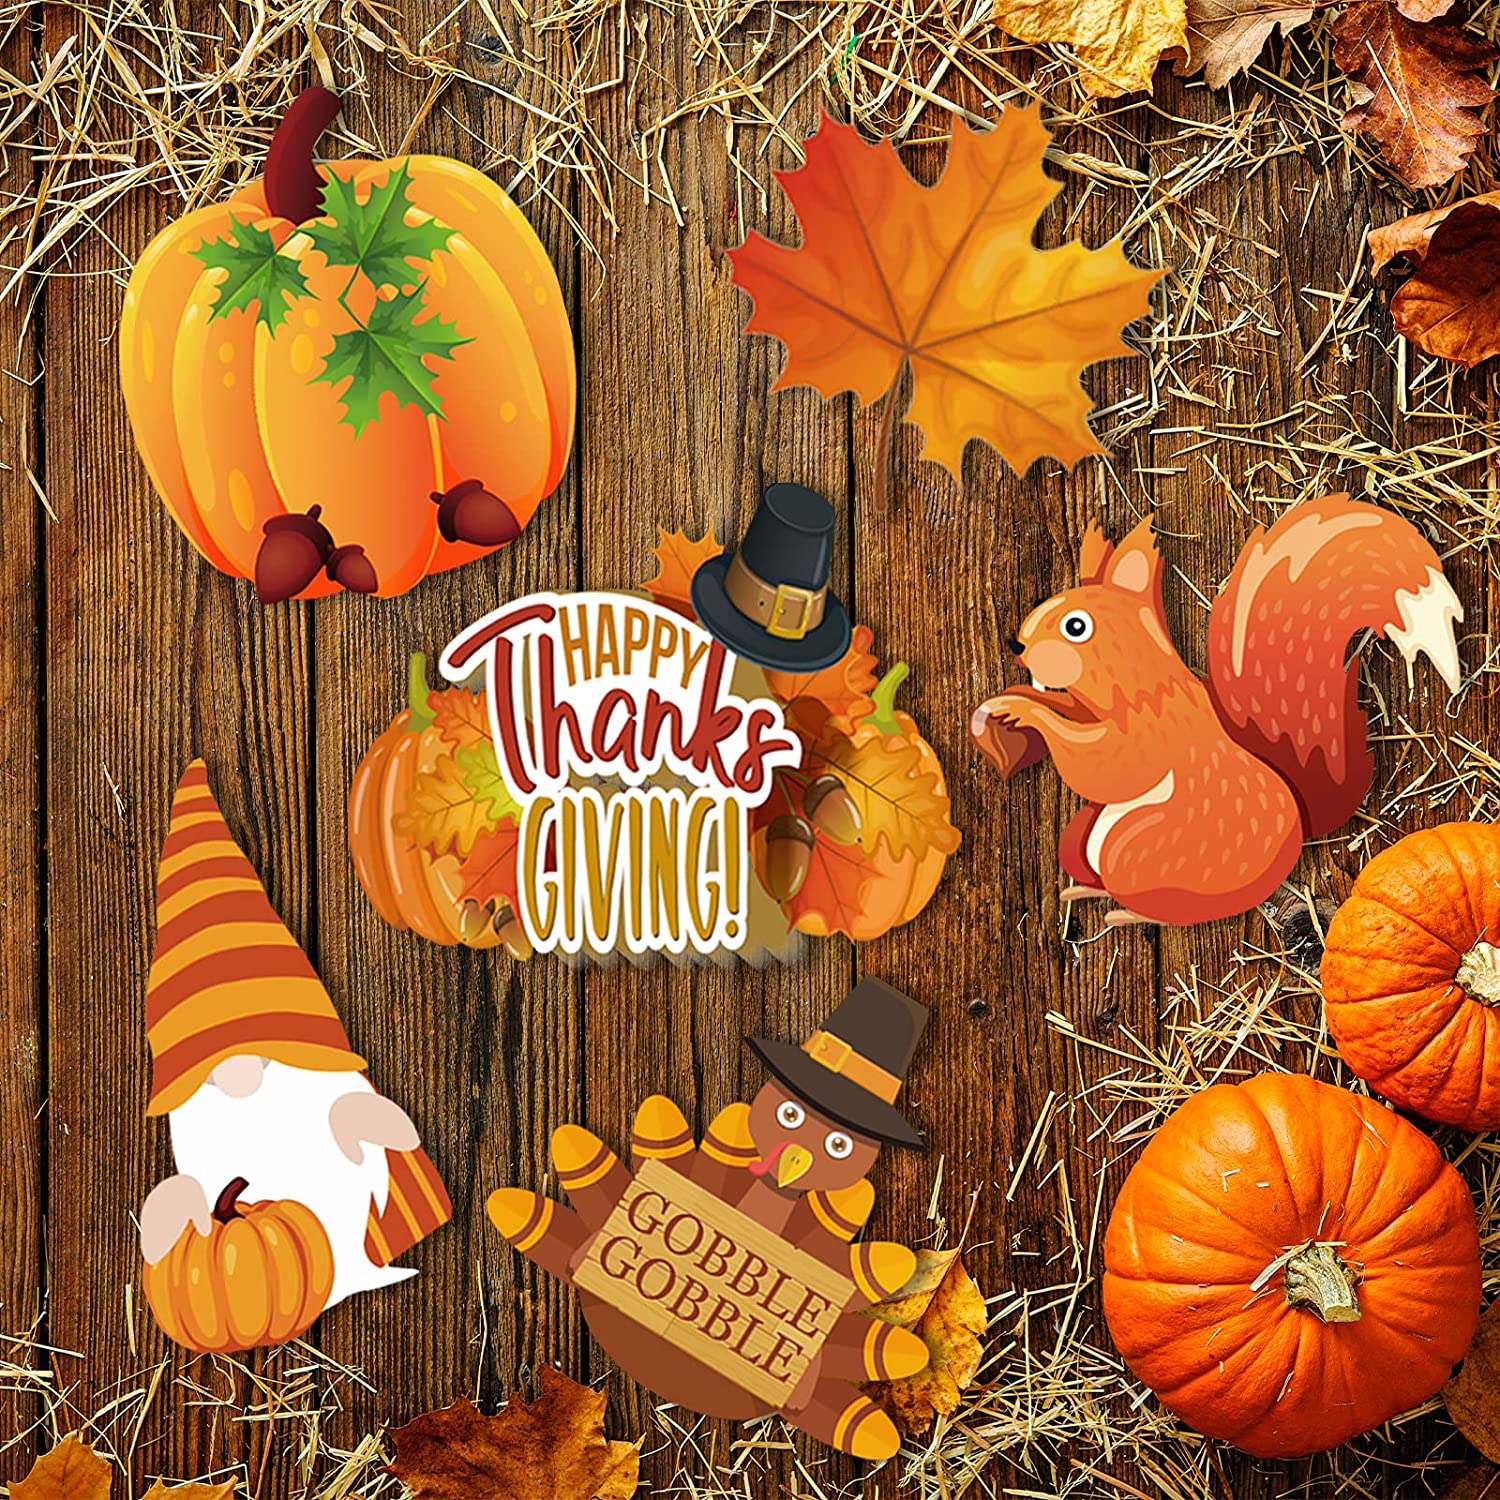 Thanksgiving Yard Signs Stakes Outdoor Decorations Fall Lawn Decorations Signs, Squirrel, Turkey, Gnome, Pumpkin Corrugated Yard Decorations for Fall Thanksgiving Decorations Outside